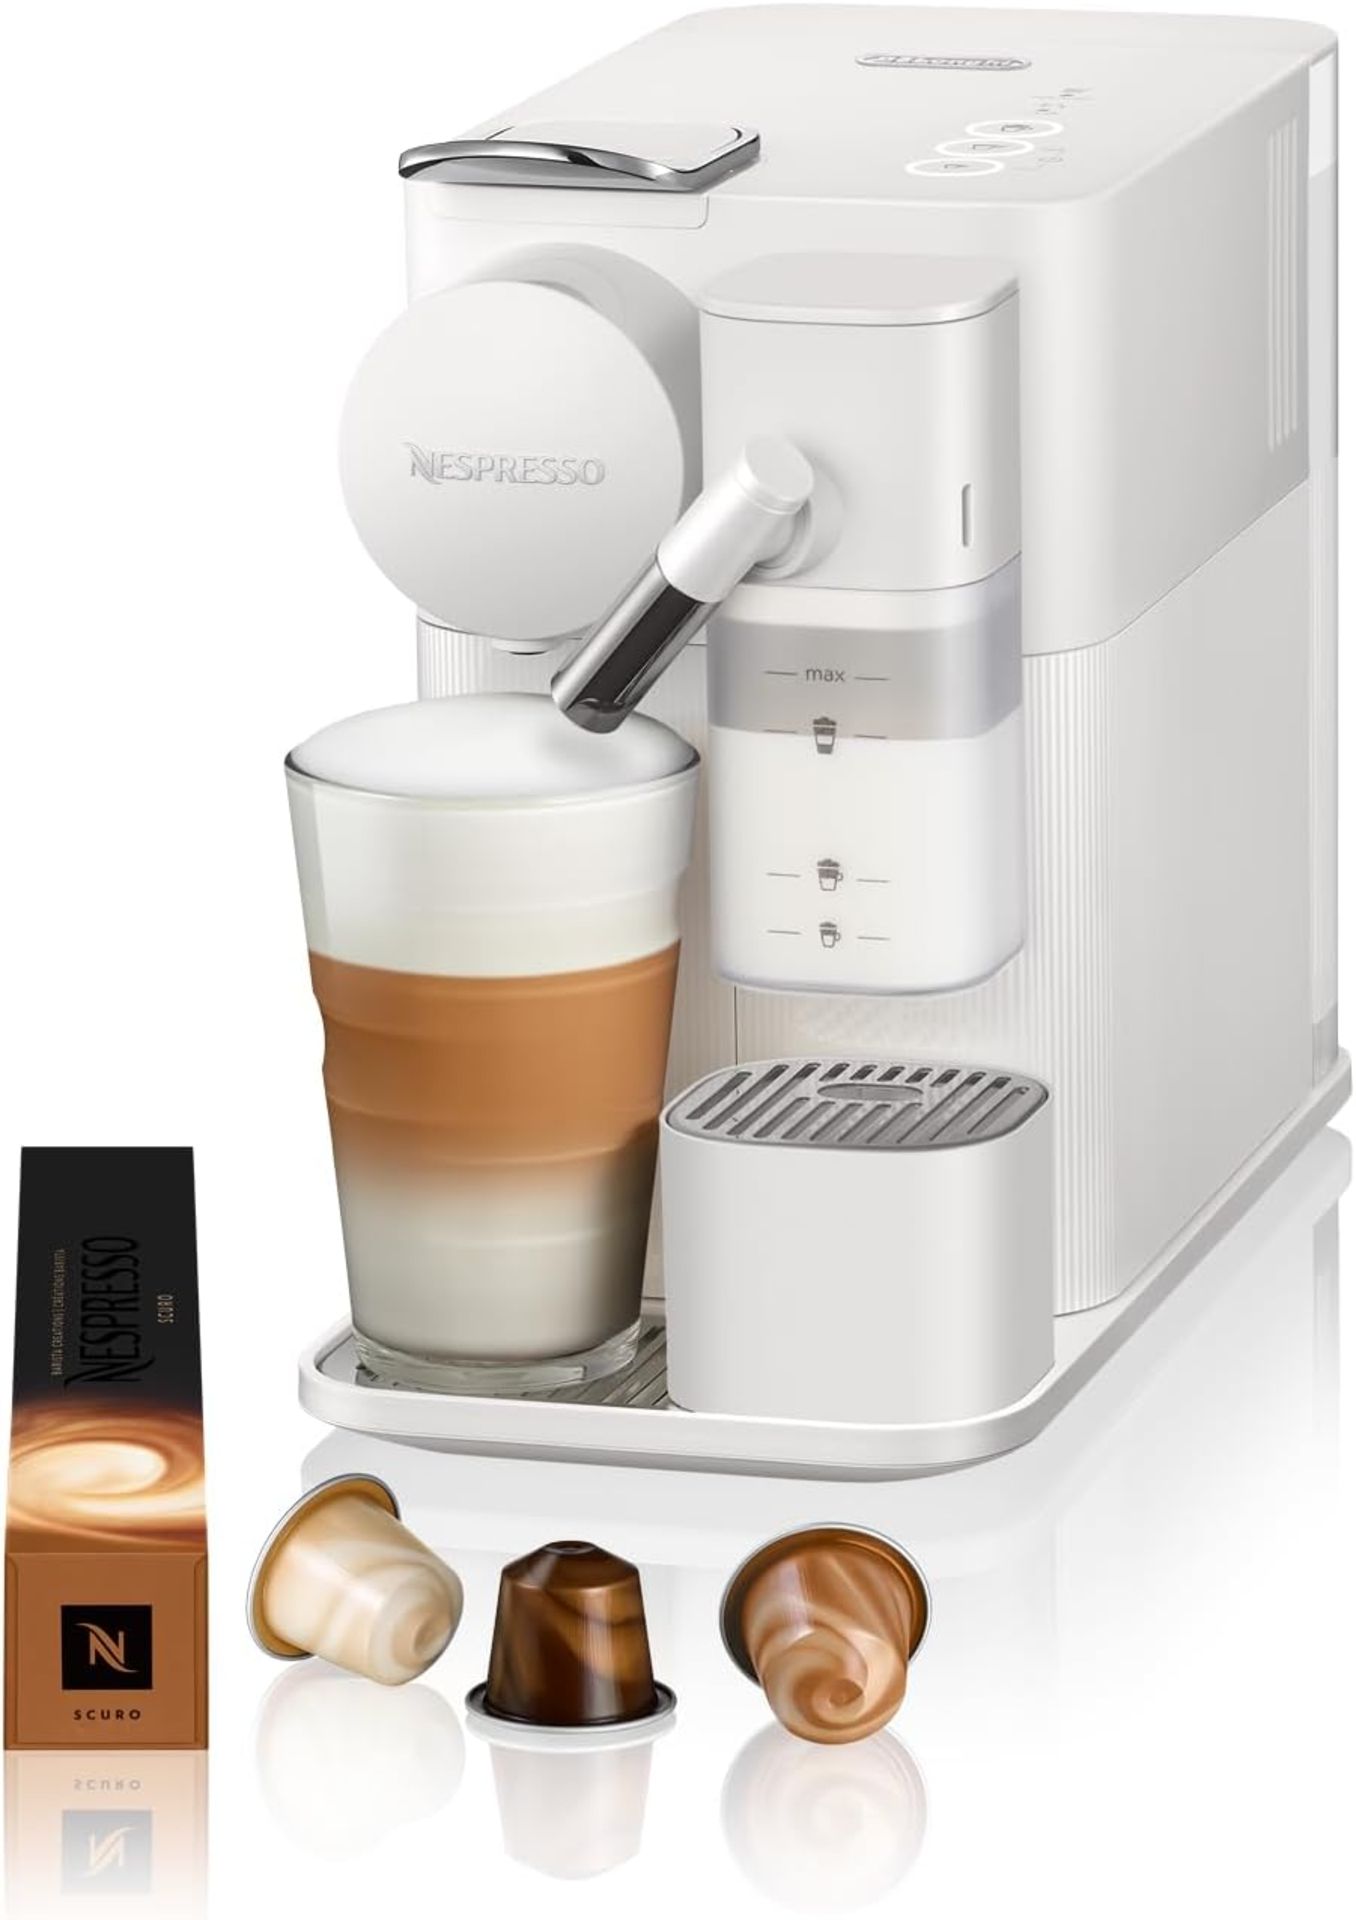 Nespresso Coffee Maker by Deâ€™Longhi -  Excellent Condition - New RRP Â£259.99